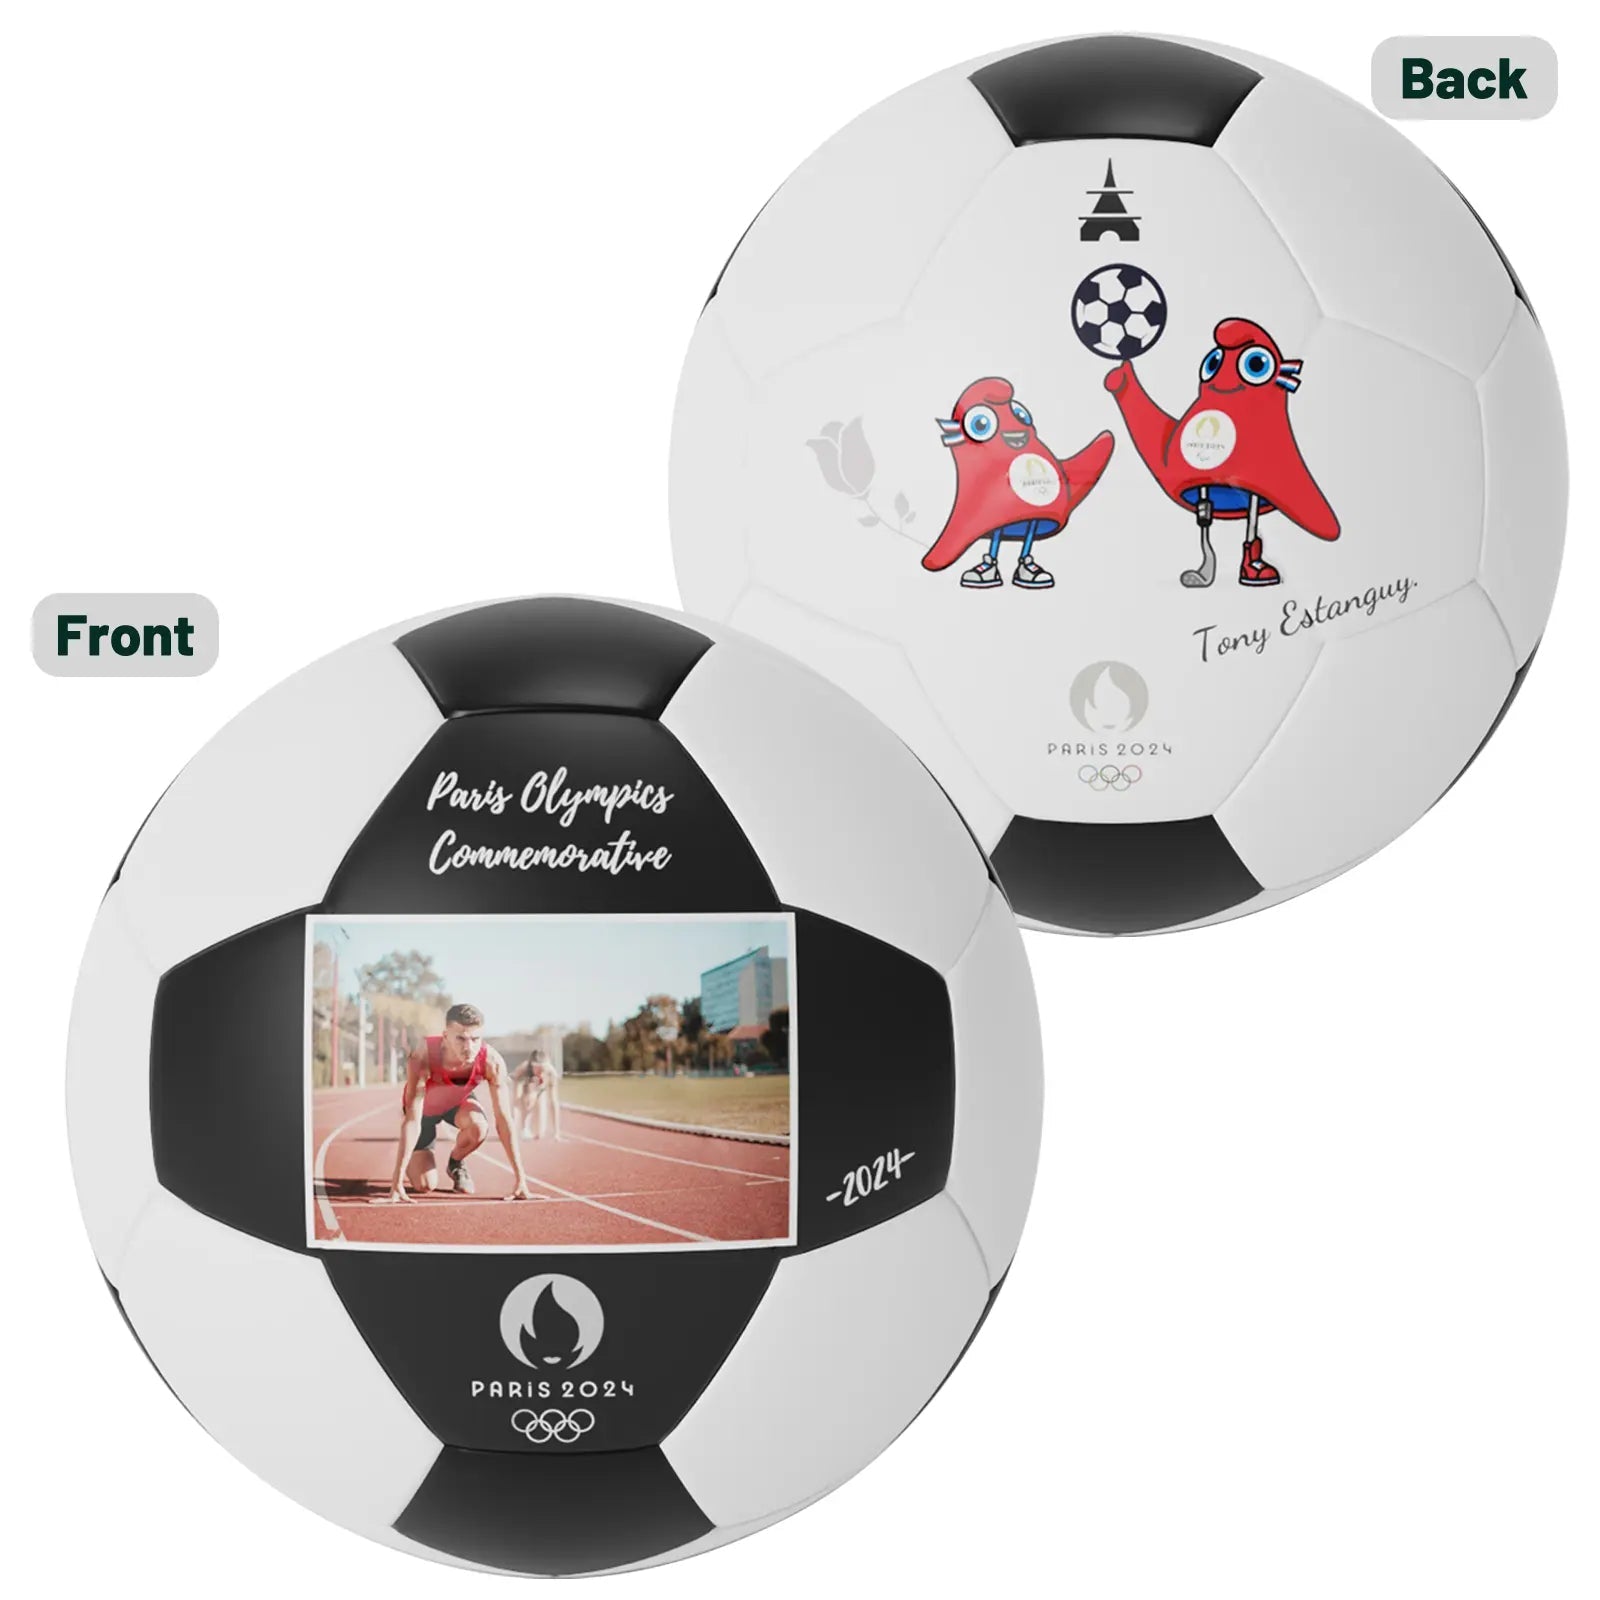 Personalized Custom Paris Olympics Themed Commemorative Soccer Ball - Family Watchs